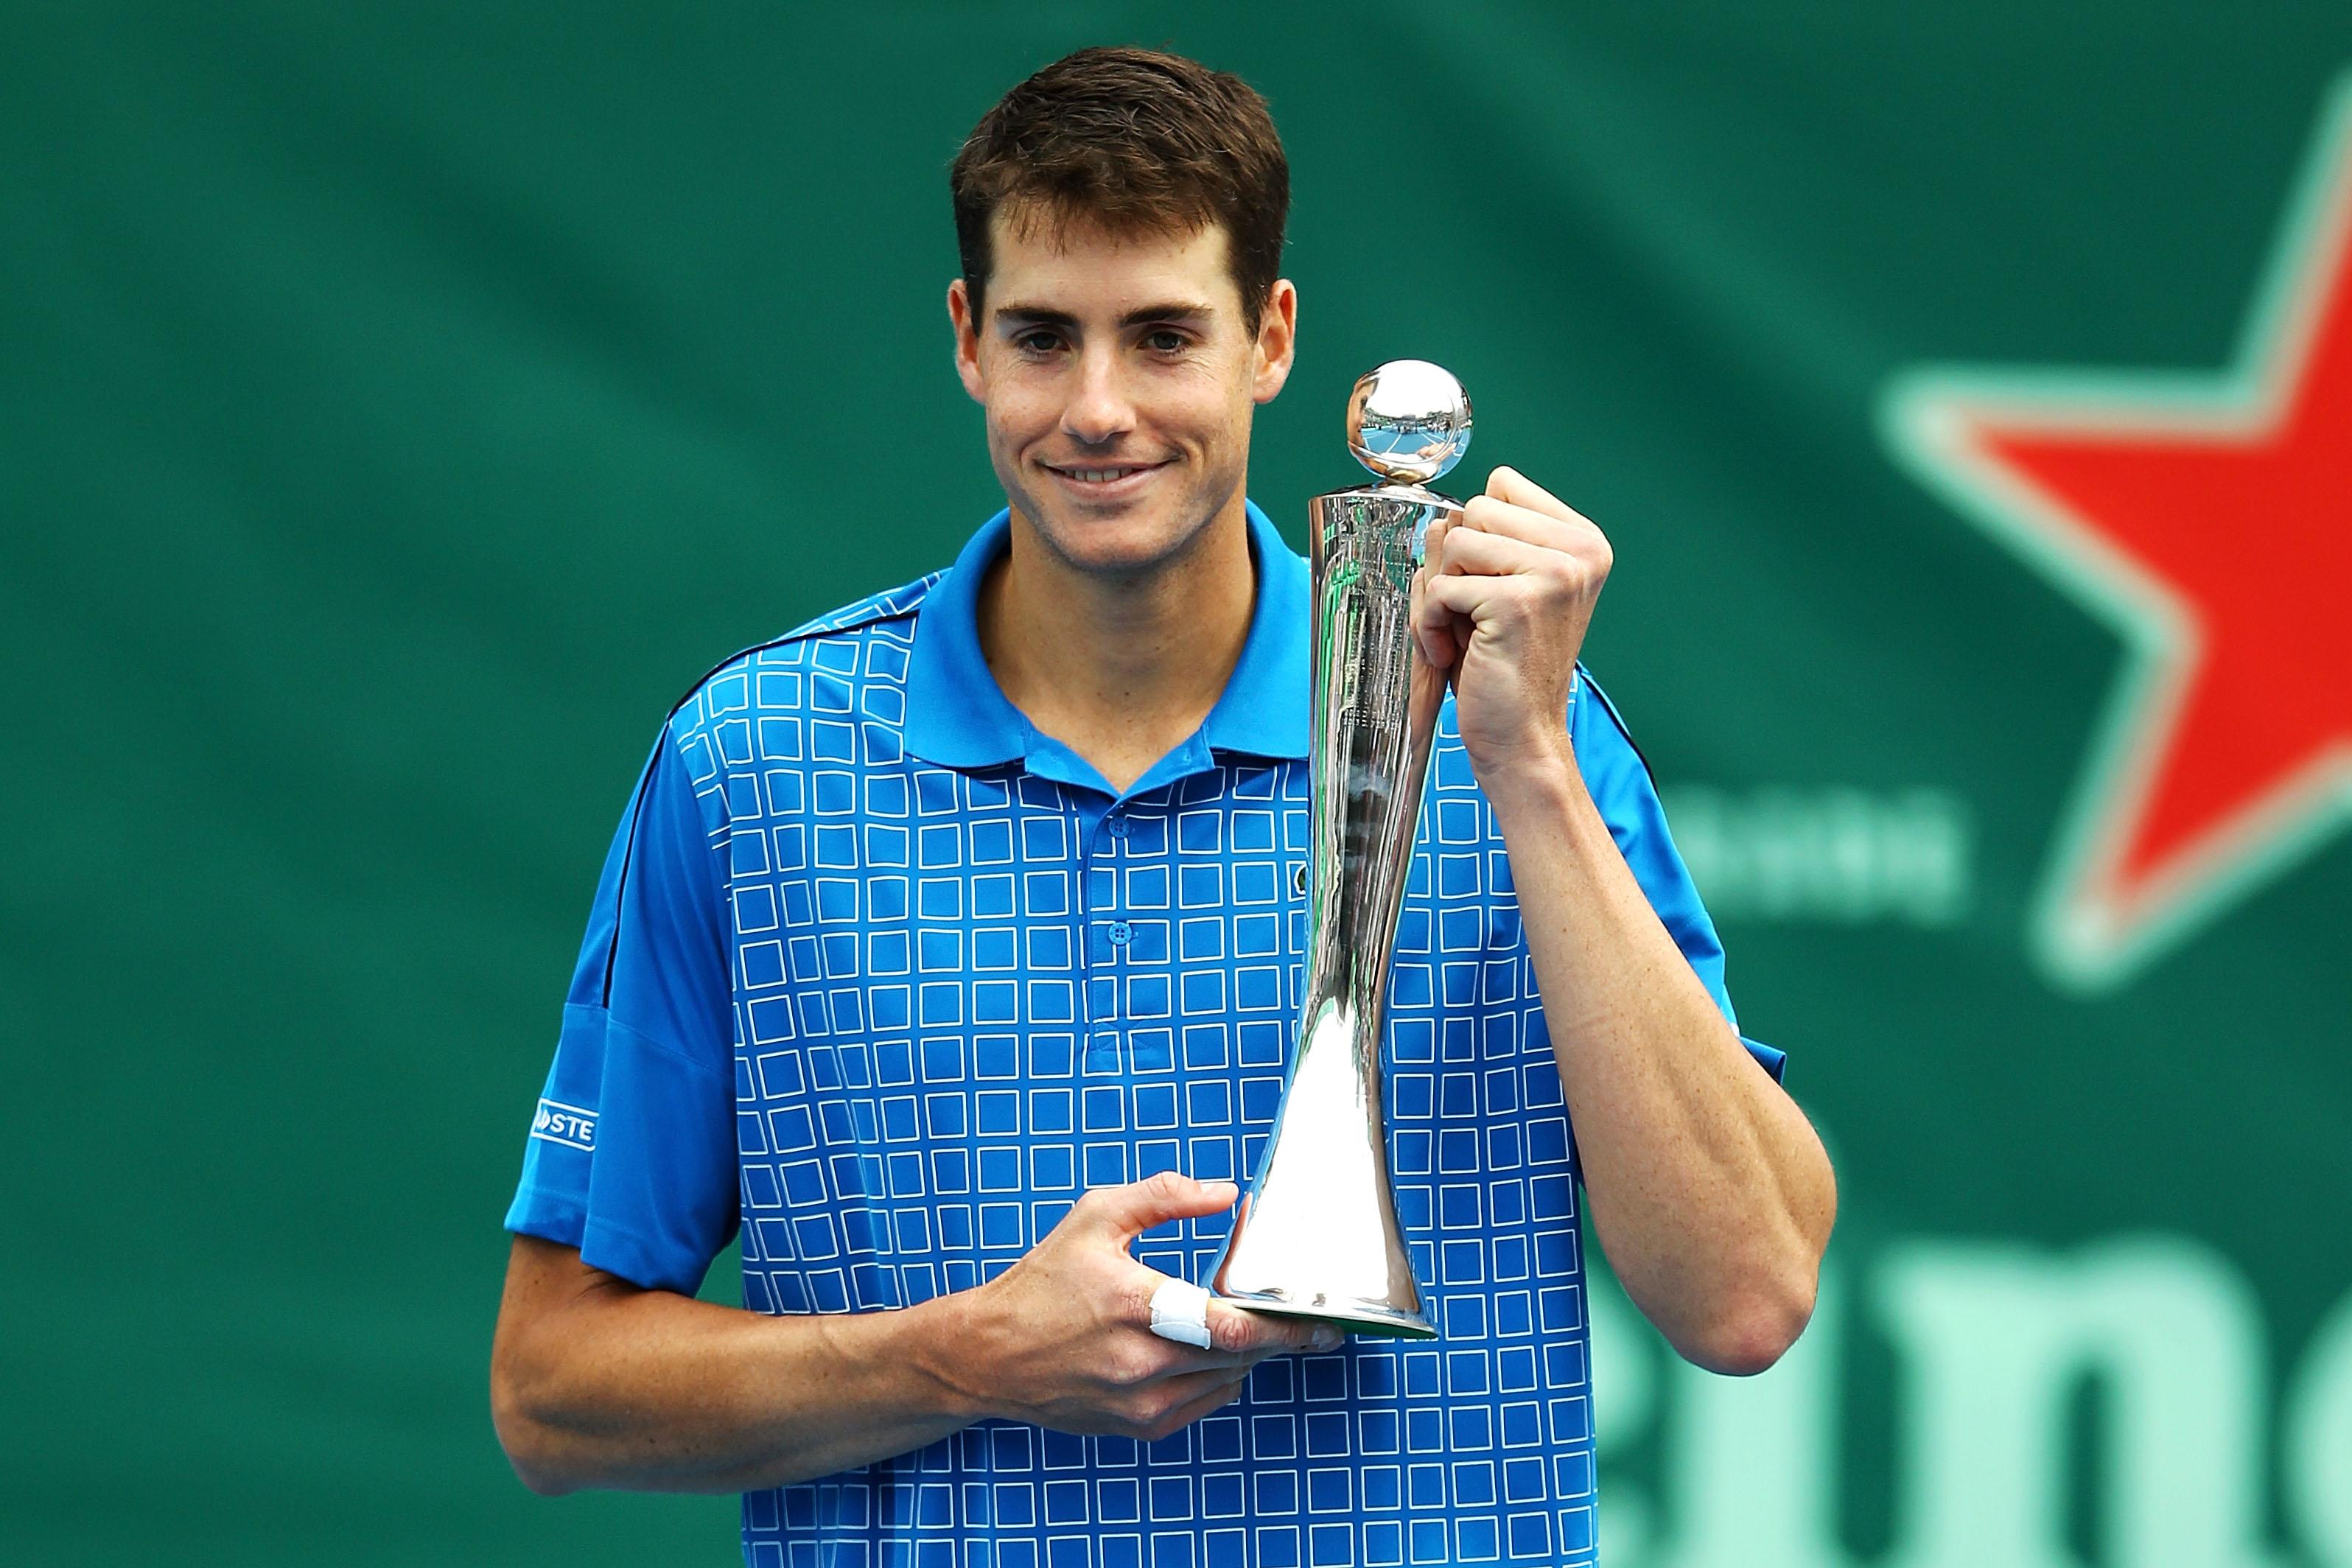 American number one John Isner returning to ASB Classic in 2018 